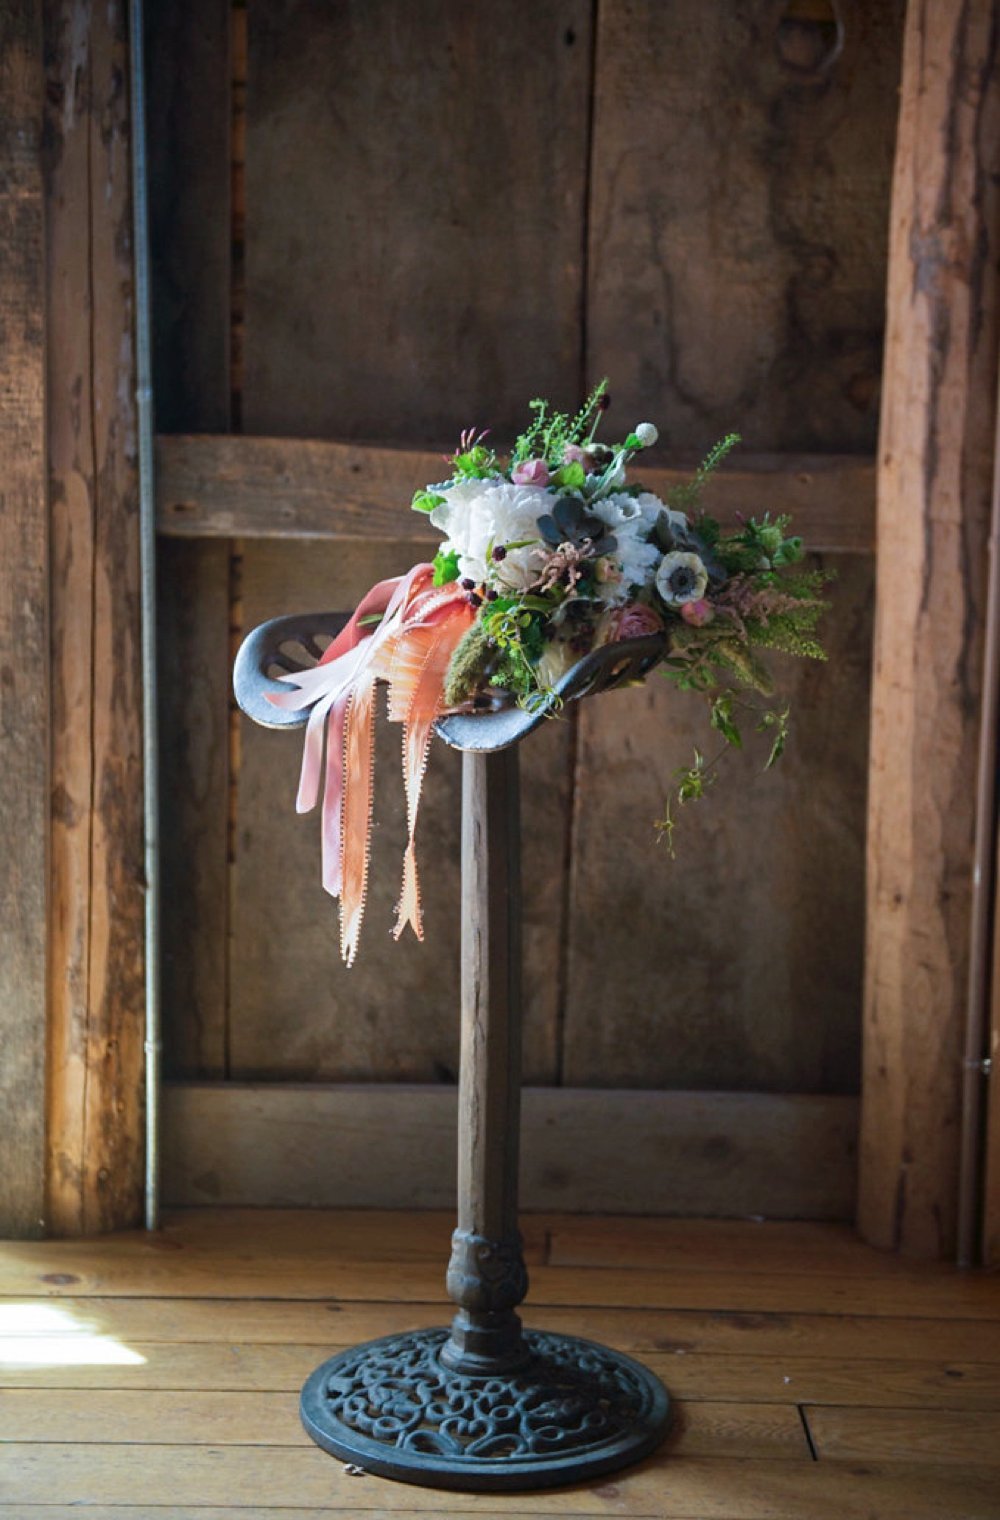 Gorgeous rustic wedding bouquet in blush, white and green